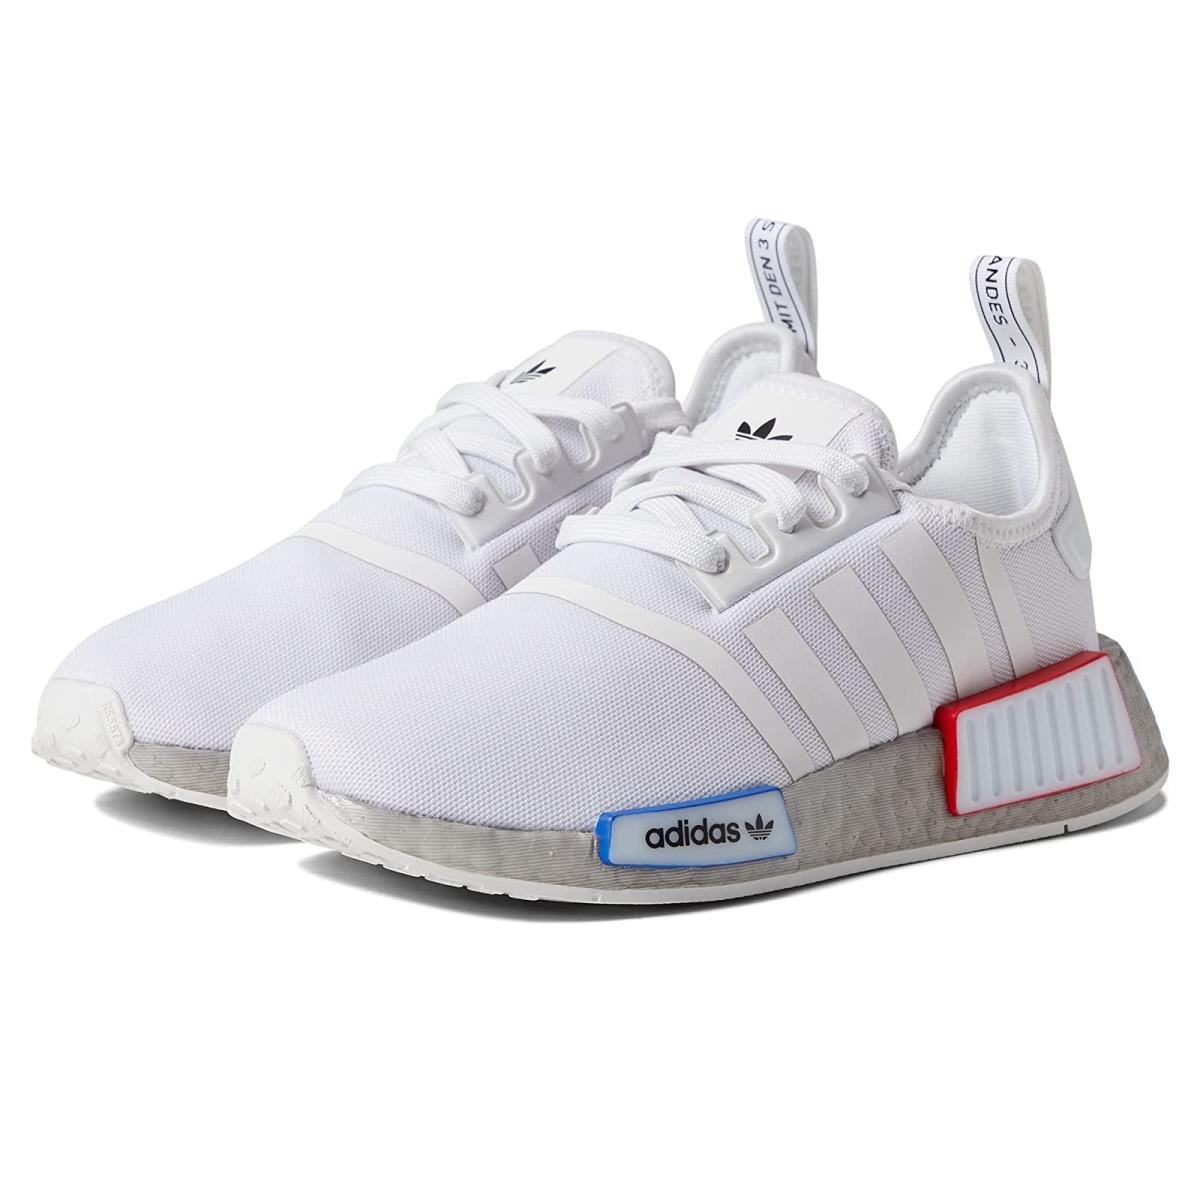 Boy`s Sneakers Athletic Shoes Adidas Originals Kids NMD_R1 J Big Kid White/White/Grey One